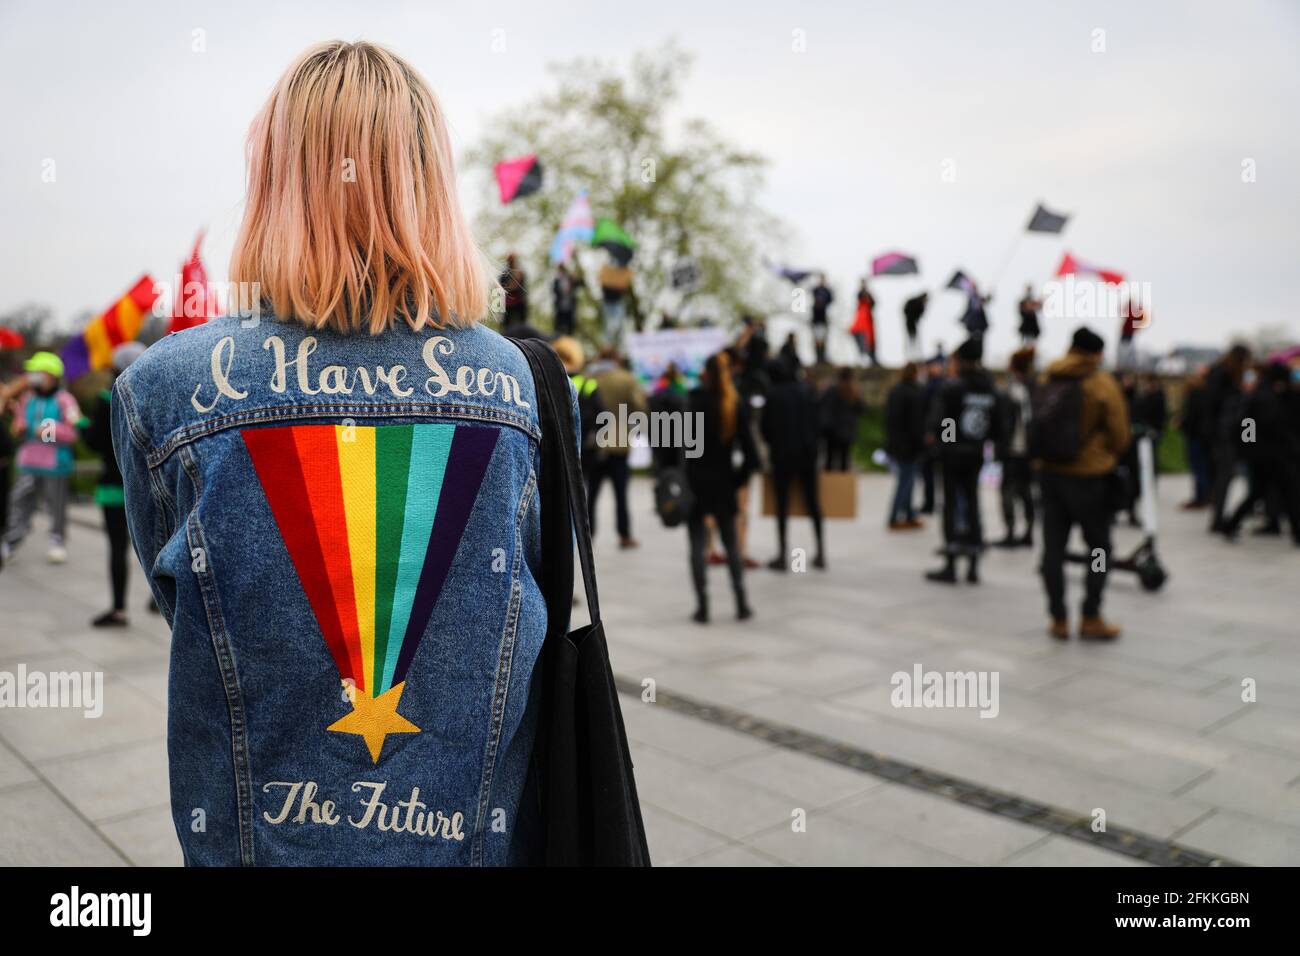 Slogan 'I have seen the future' and the LGBTQ symbol is seen on the back of a member of LGBTQ community during the demonstration.International Workers' Day, also known as Labour Day or May Day has a long tradition in Poland. Before the fall of communism, propaganda events were held on this day, it is now a day for young adults with left-wing views to express their reservations about the labour market and the lack of social justice it entails, as forcing workers into self-employment and abuses of labour rights are common practices in Poland. Stock Photo